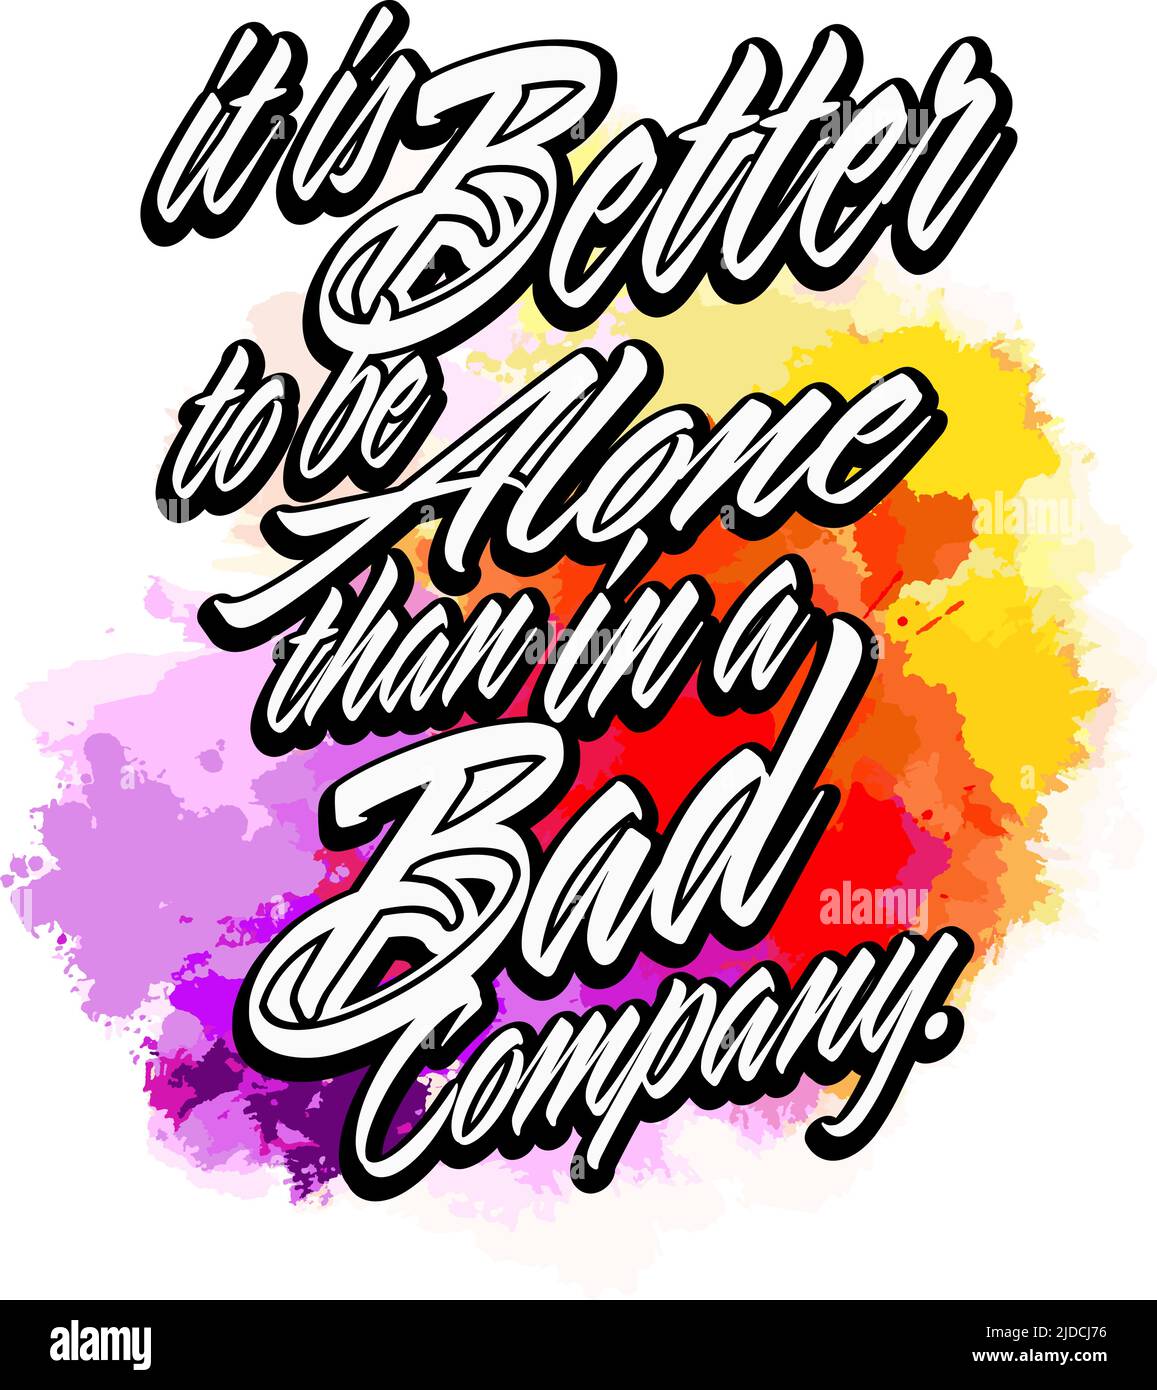 It Is Better To Be Alone Than In A Bad Company. Lettering Design Vector art for print design. Stock Vector